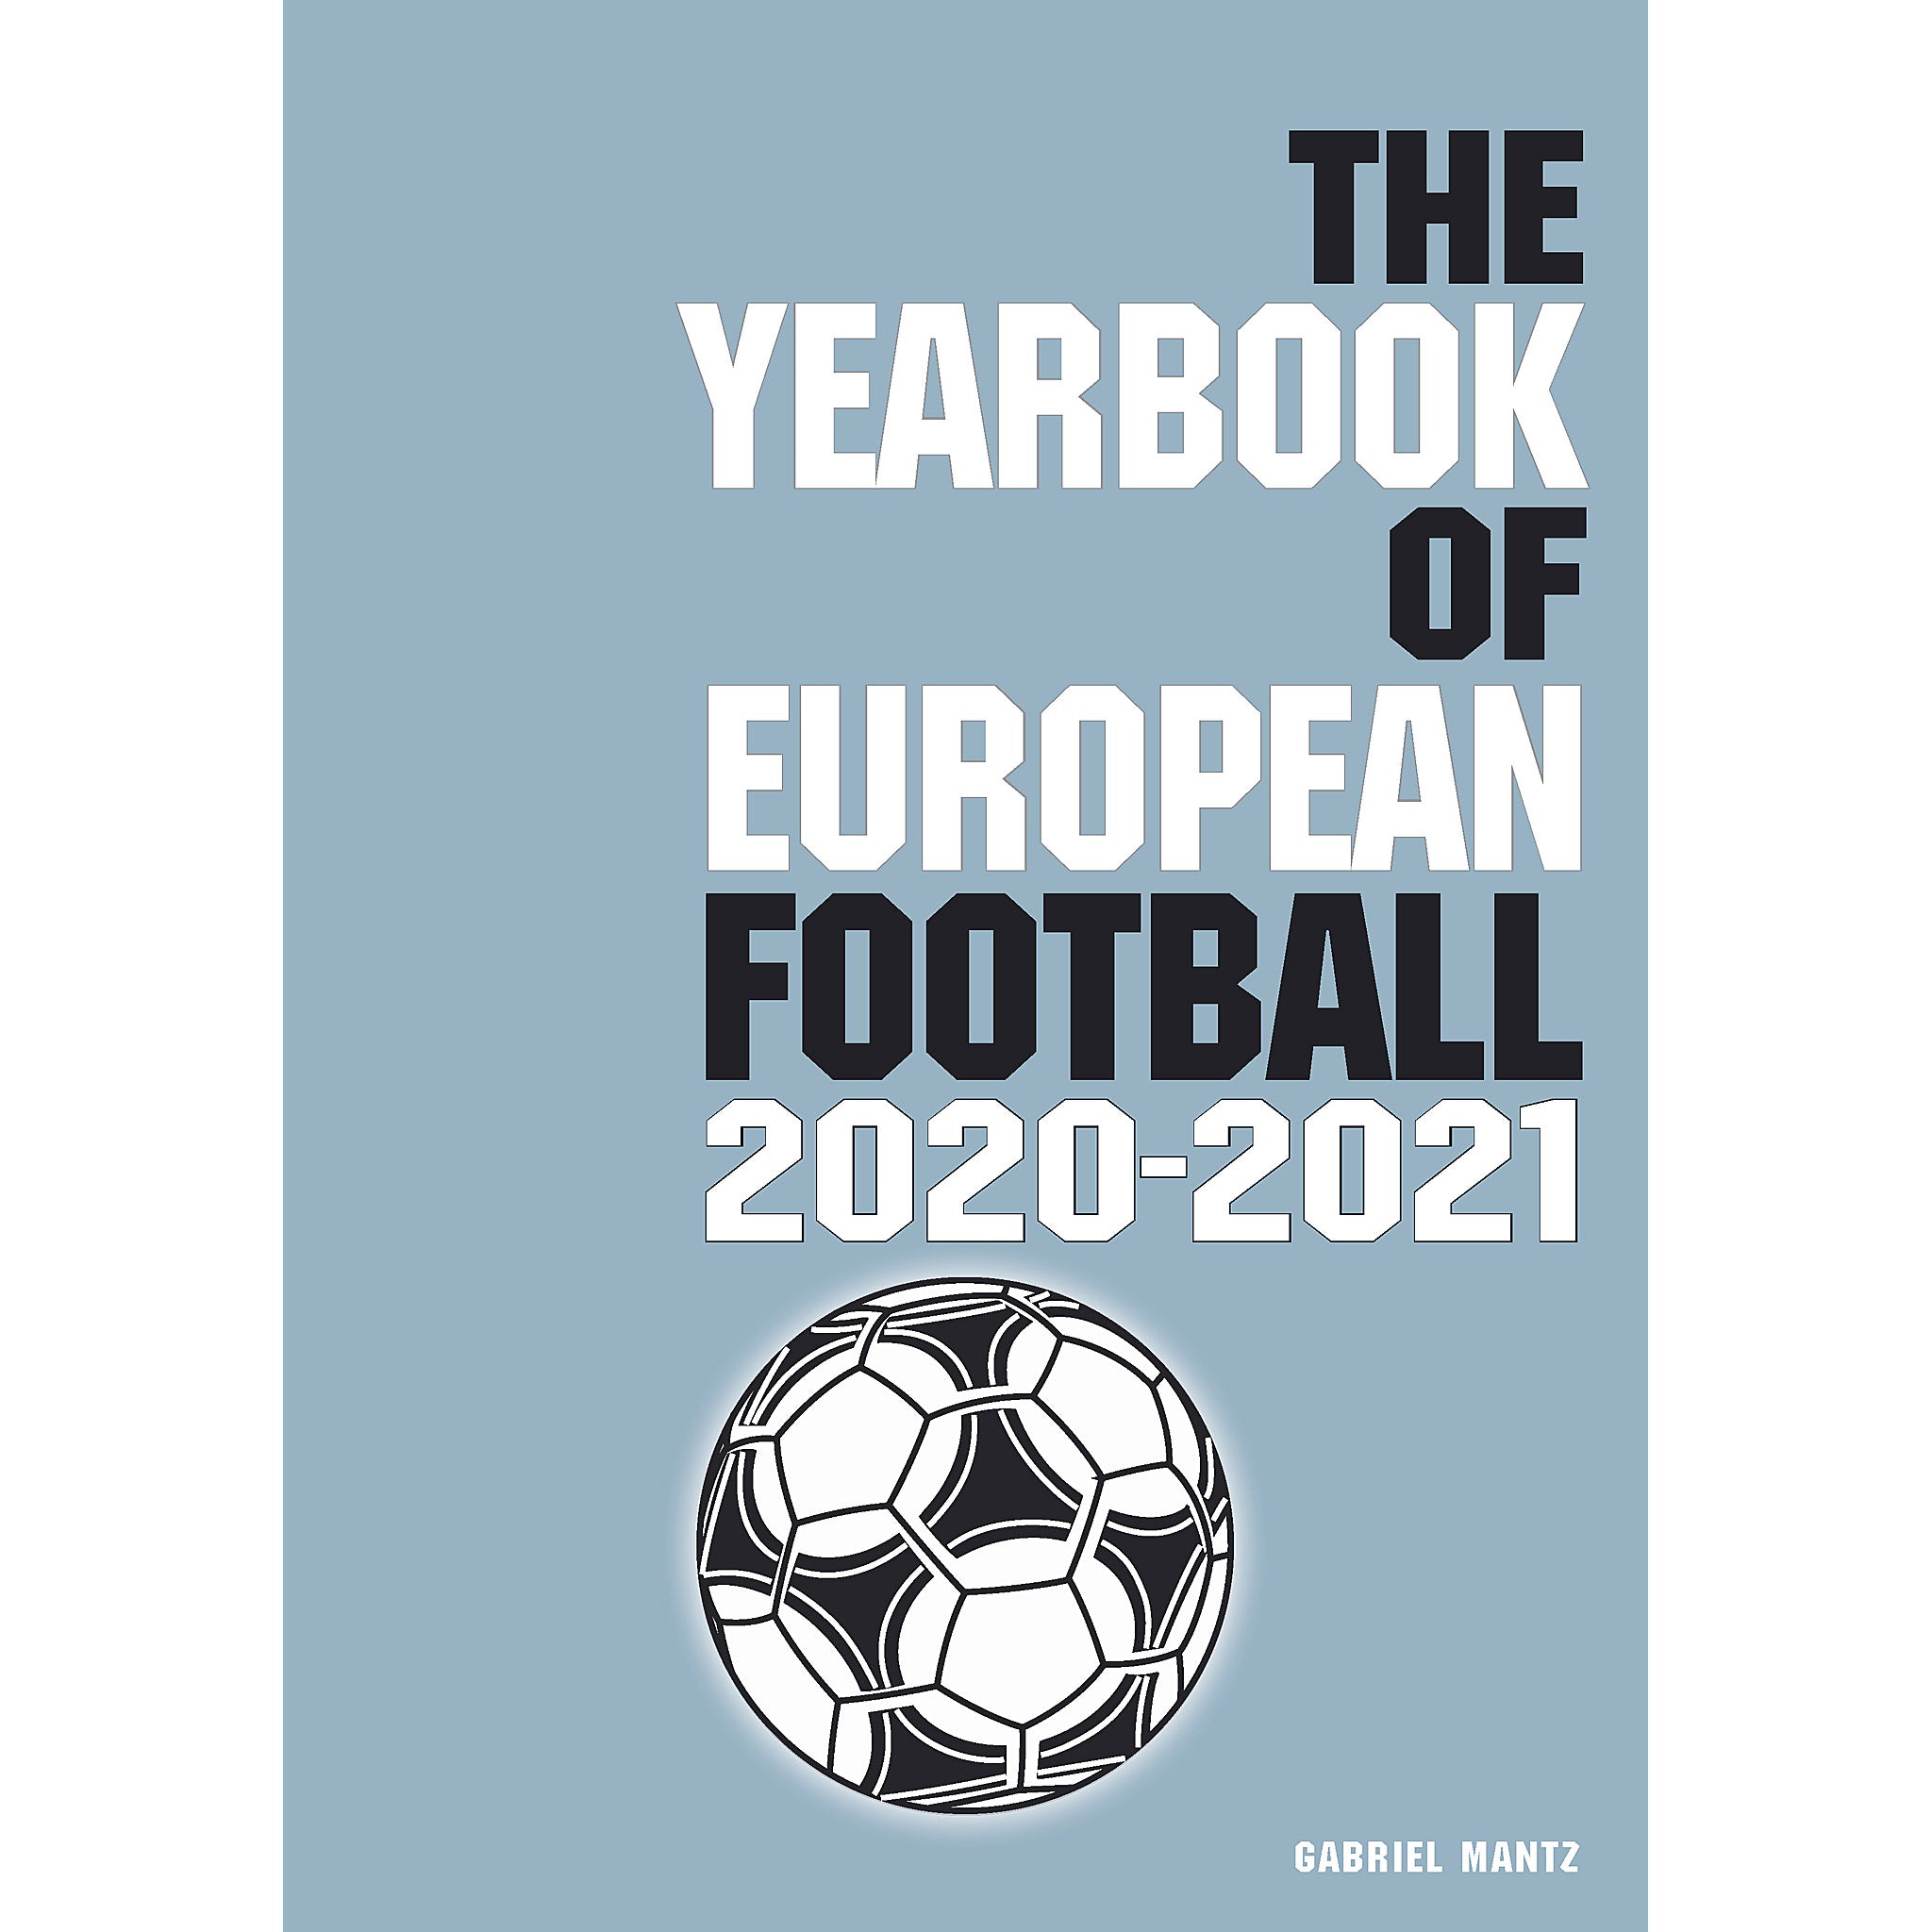 The Yearbook of European Football 2020-2021